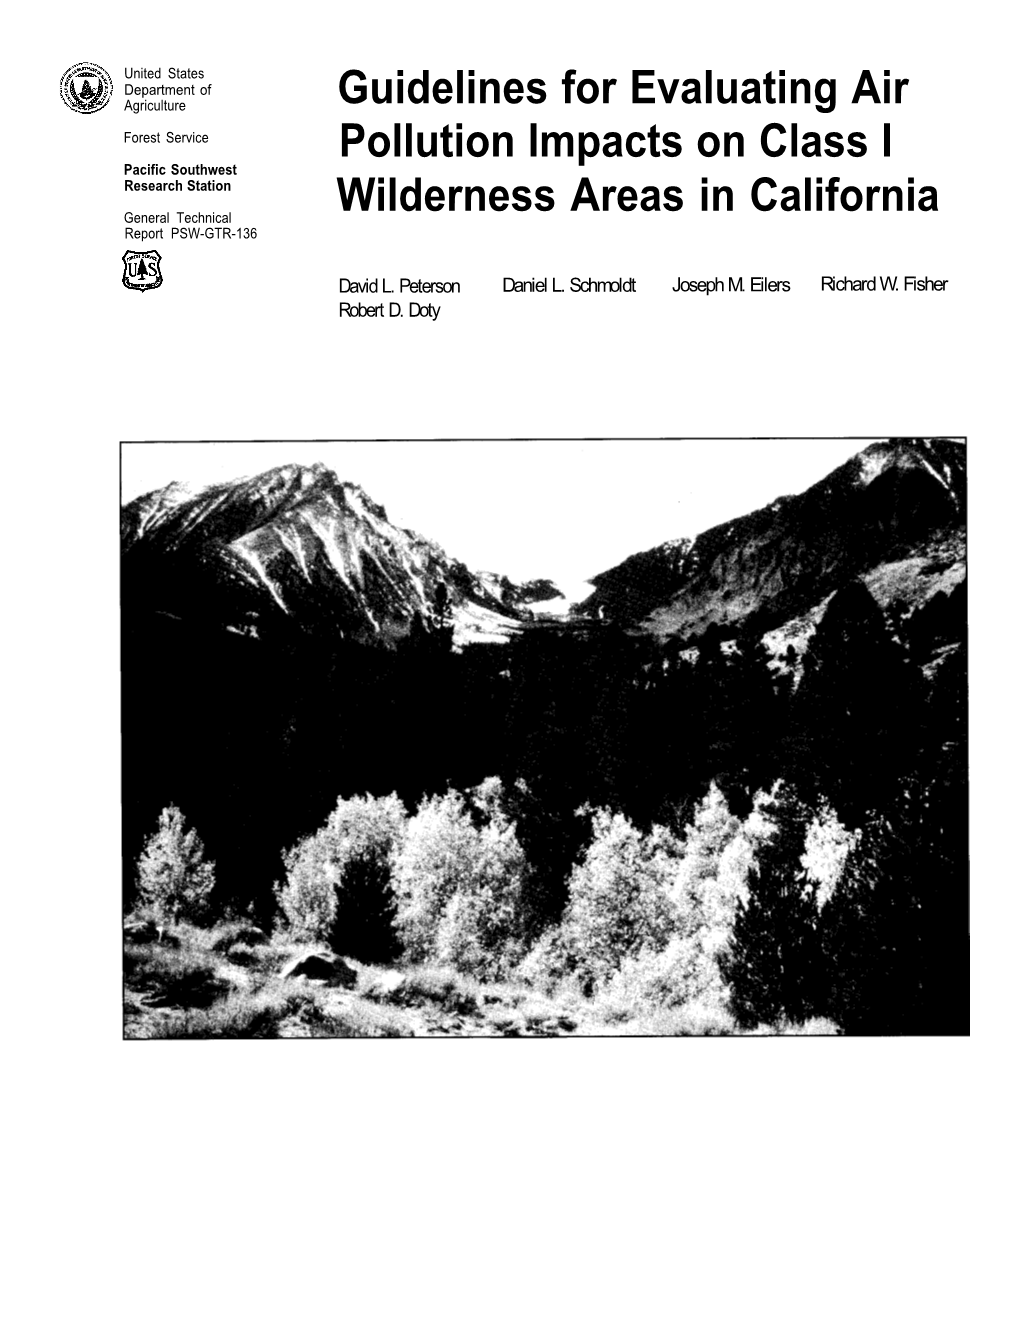 Guidelines for Evaluating Air Pollution Impacts on Class I Wilderness Areas in California